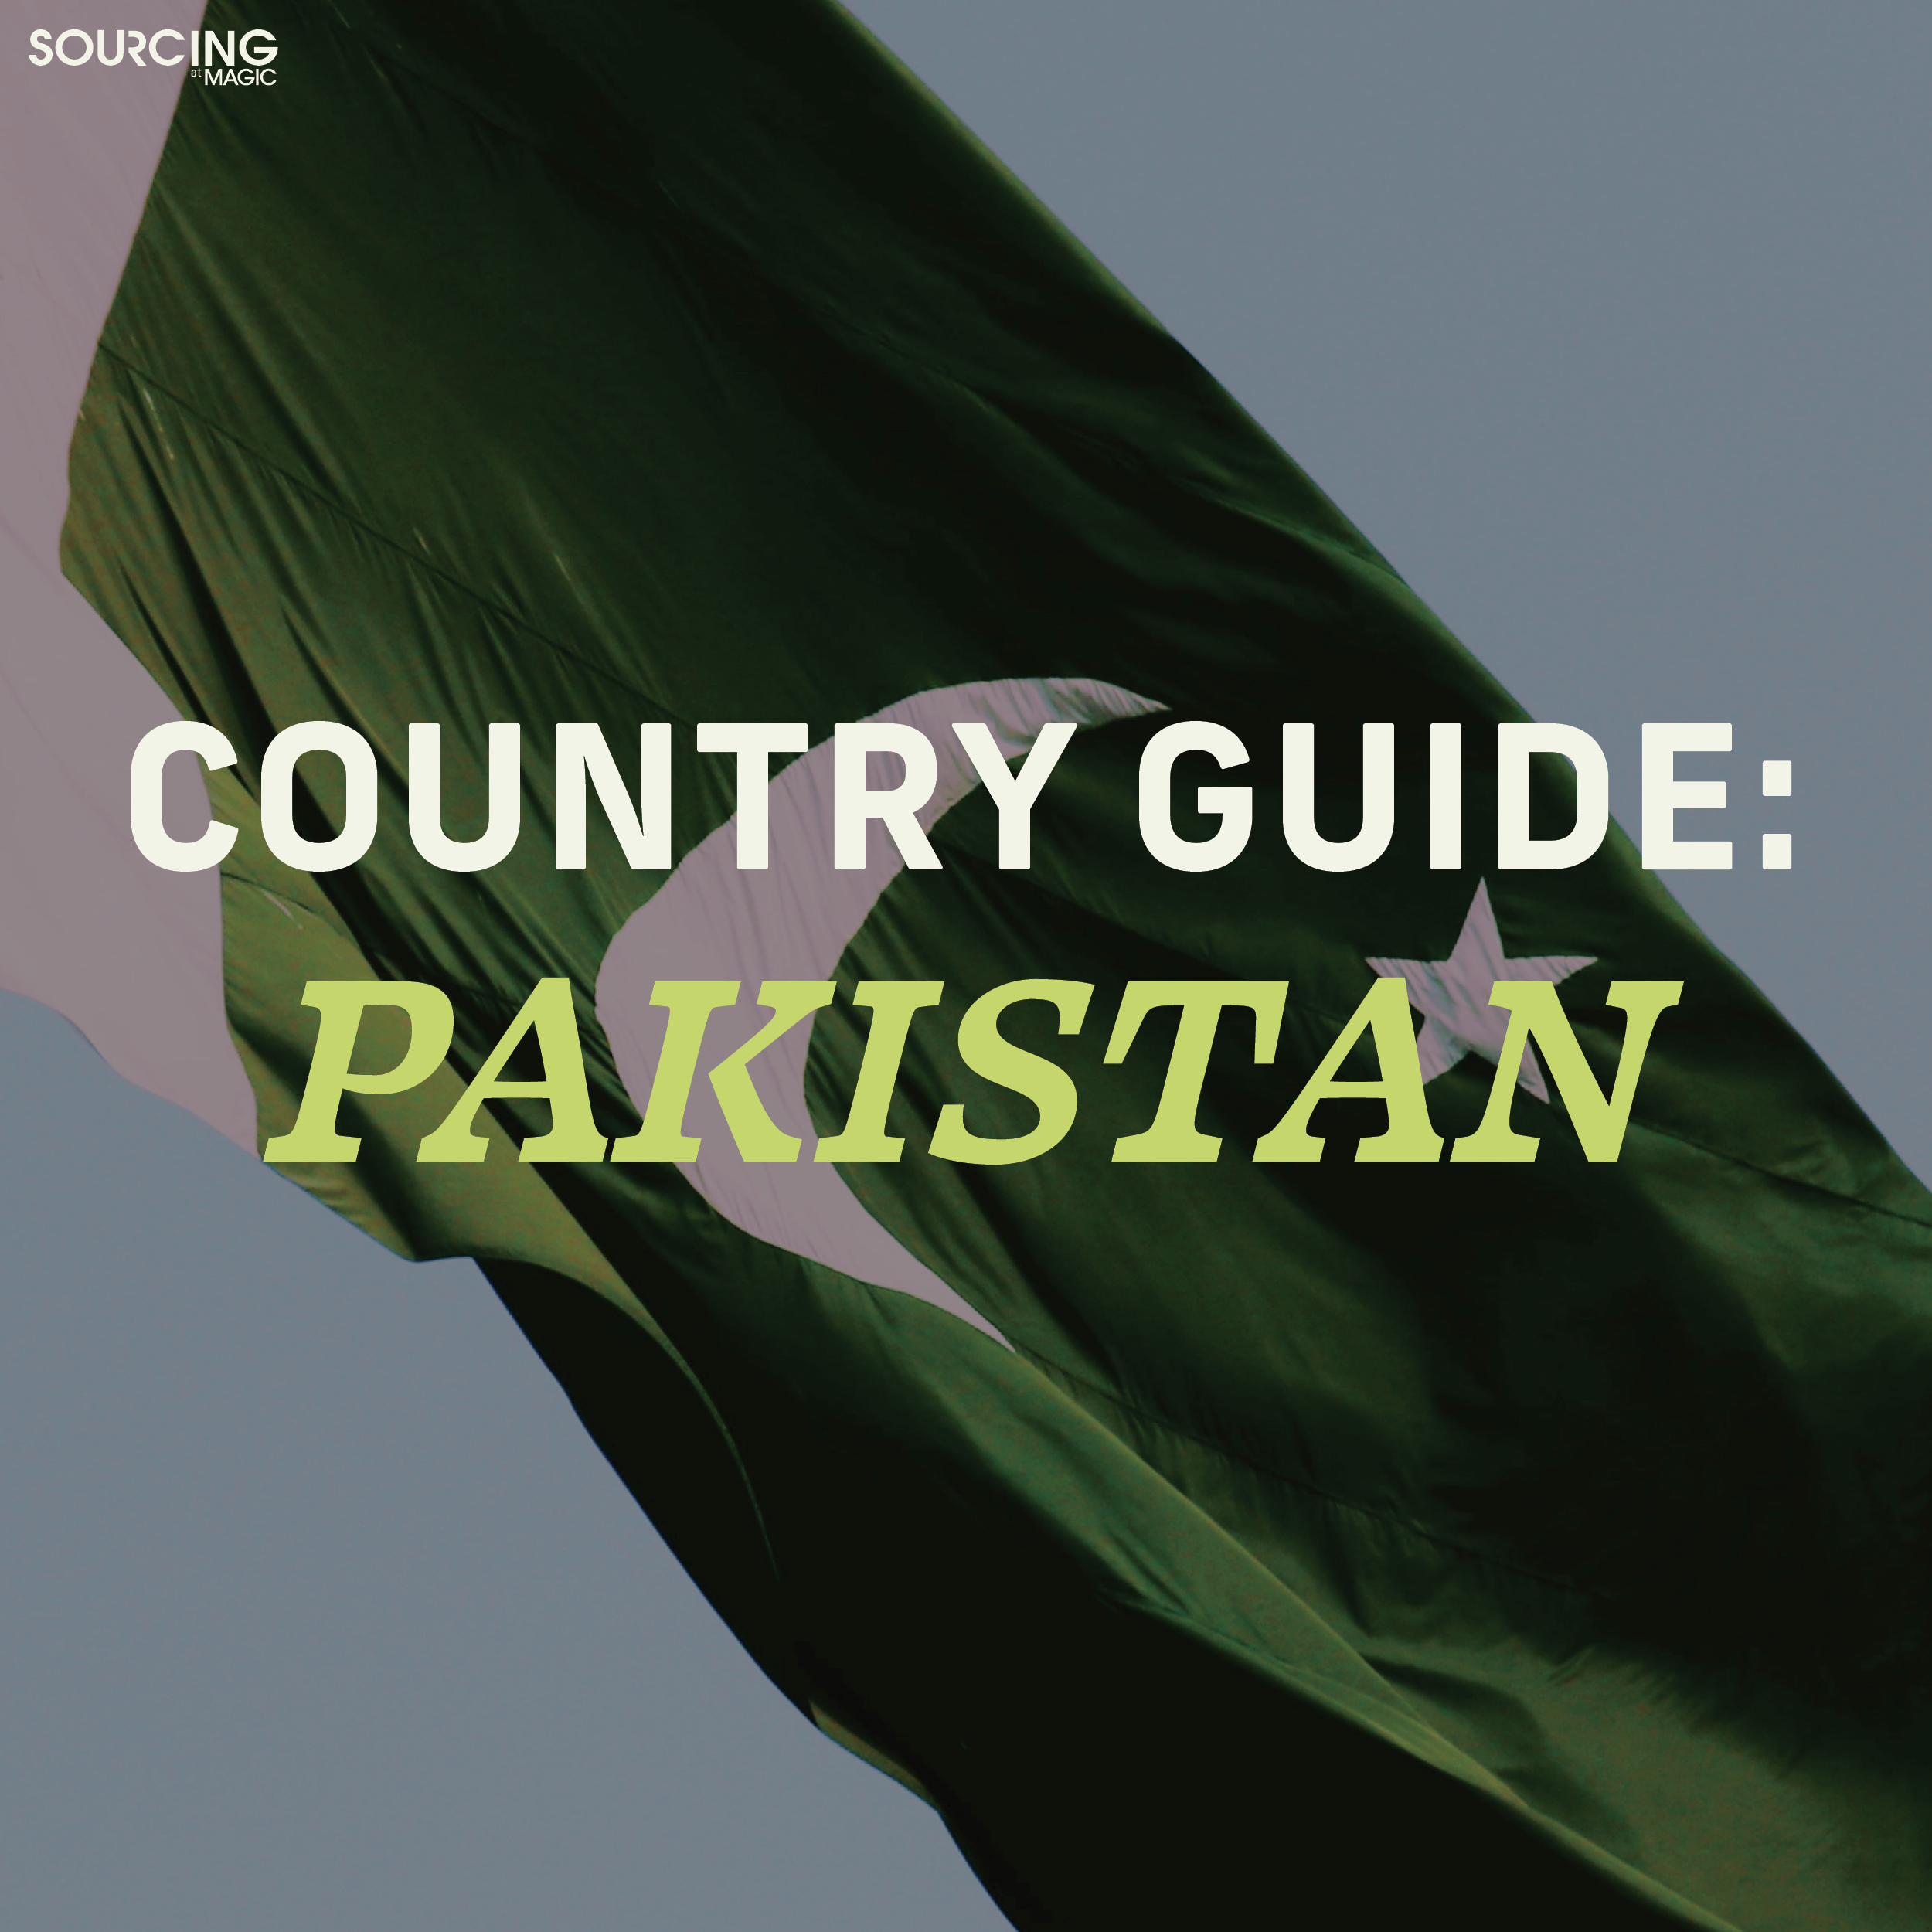 SOURCING at MAGIC: Country Guide - Pakistan